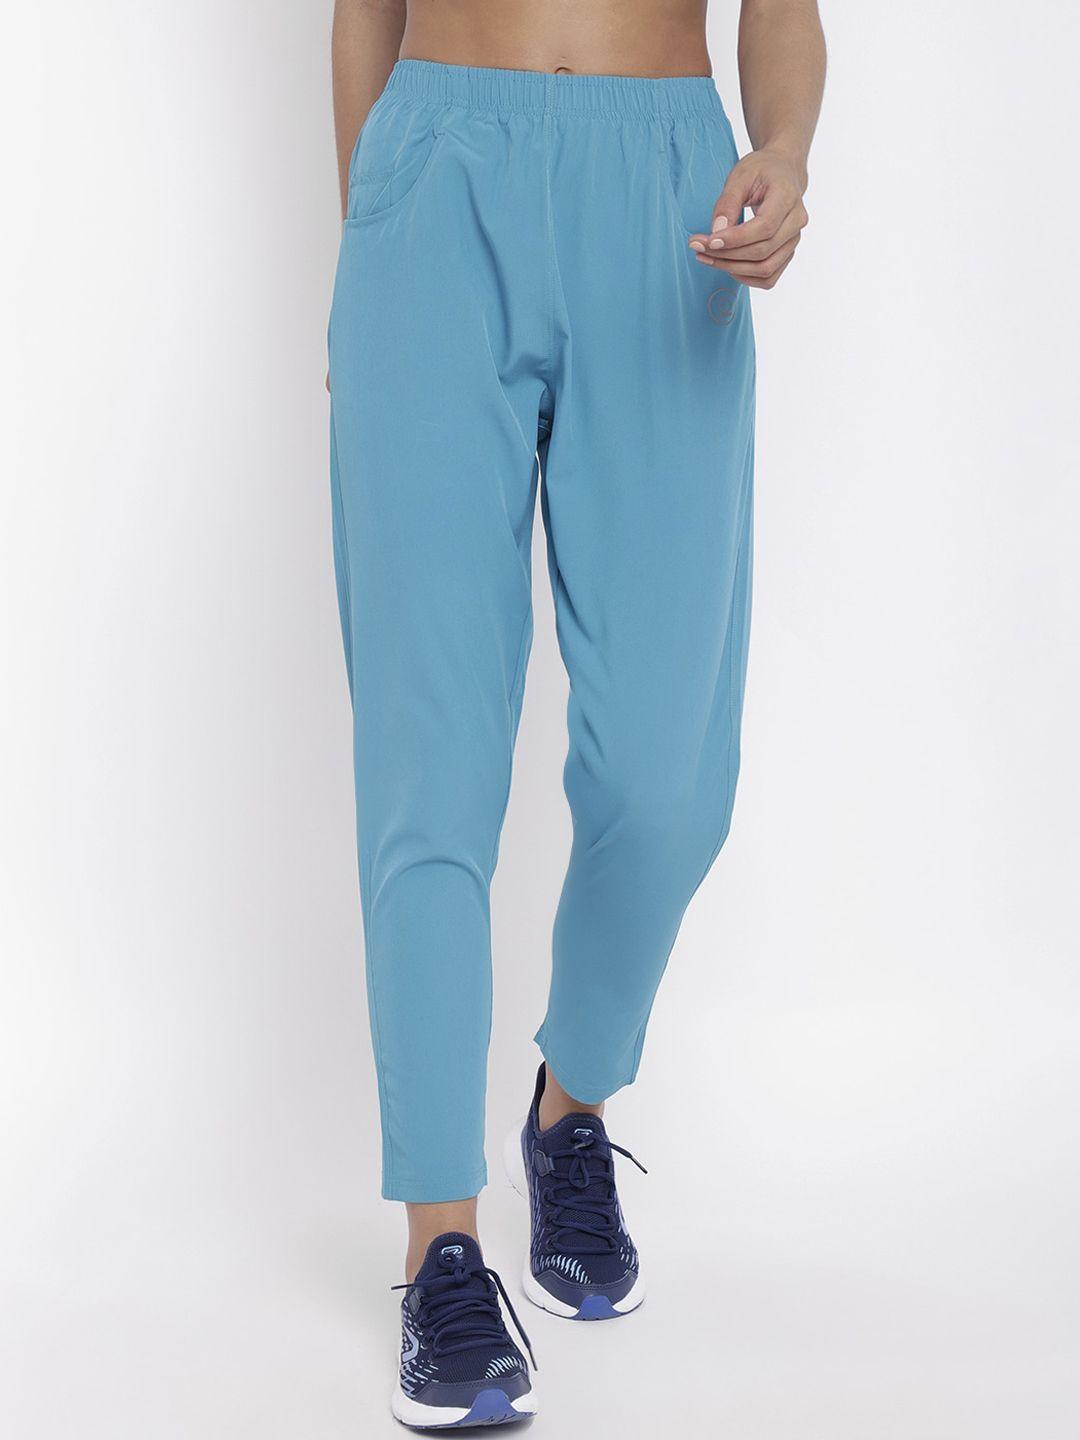 chkokko women blue solid mid rise trackpant